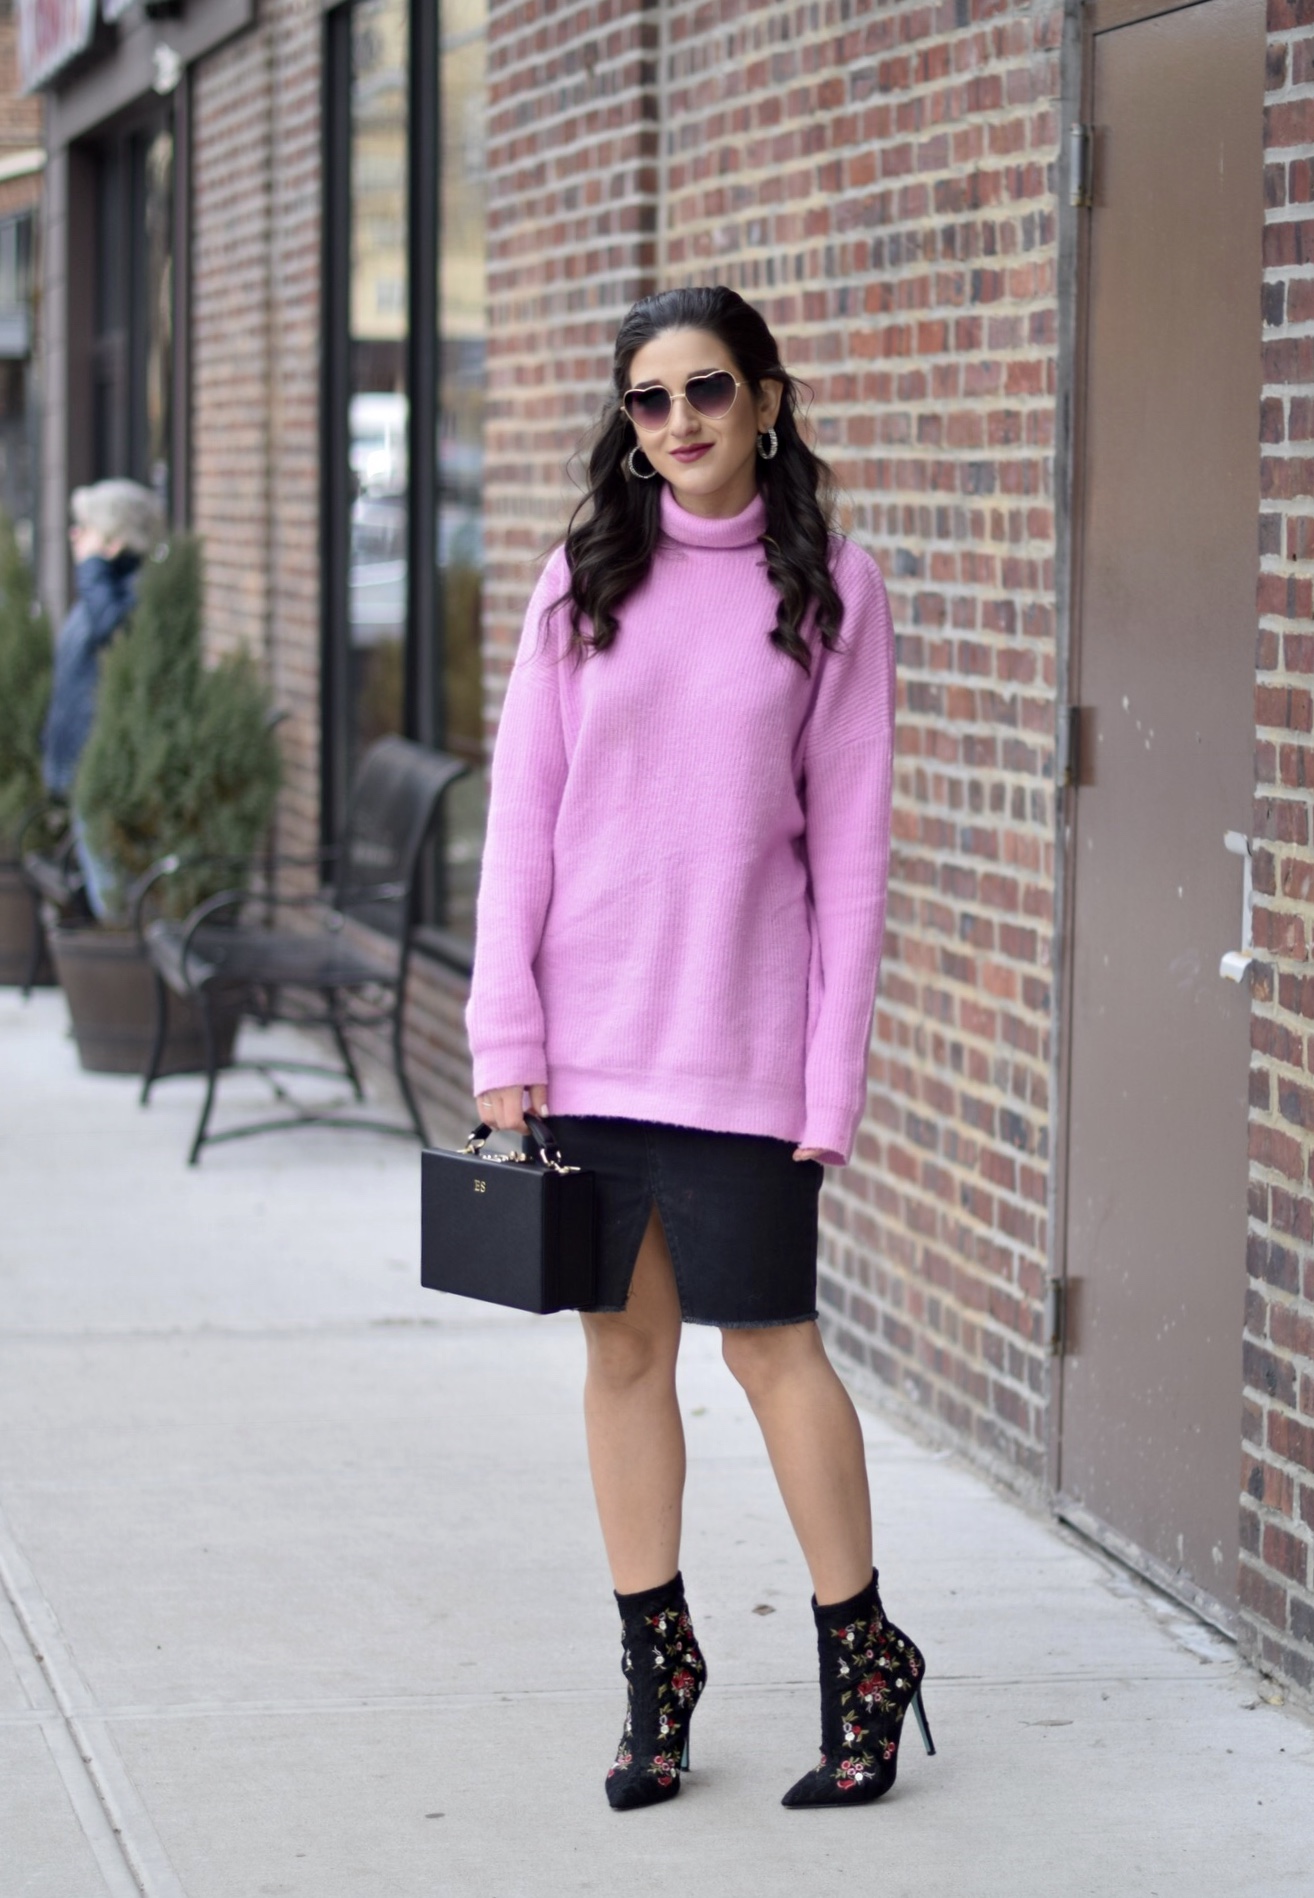 Surviving Winter With ASOS 5 Hardest Parts Of Blogging Esther Santer Fashion Blog NYC Street Style Blogger Outfit OOTD Trendy Pink Sweater Black Denim Skirt Box Bag Floral Booties Betsey Johnson Girl Women Purse Heart Sunglasses Booties Accesories .jpg